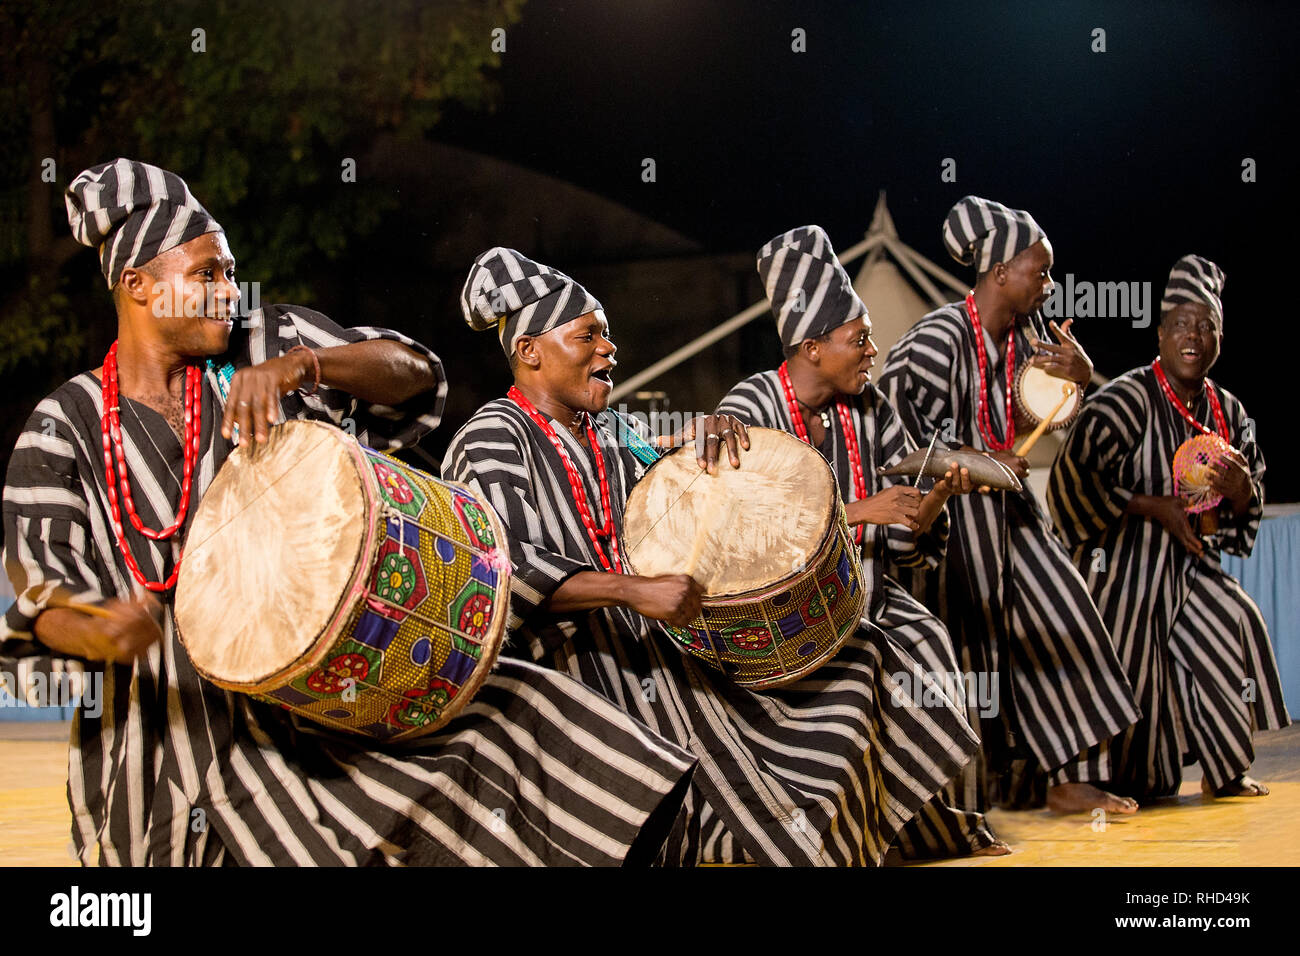 Gorizia, Italy - August 26, 2017: Drumers of Benin traditional dance company in the town street during the International Folklore festival Stock Photo